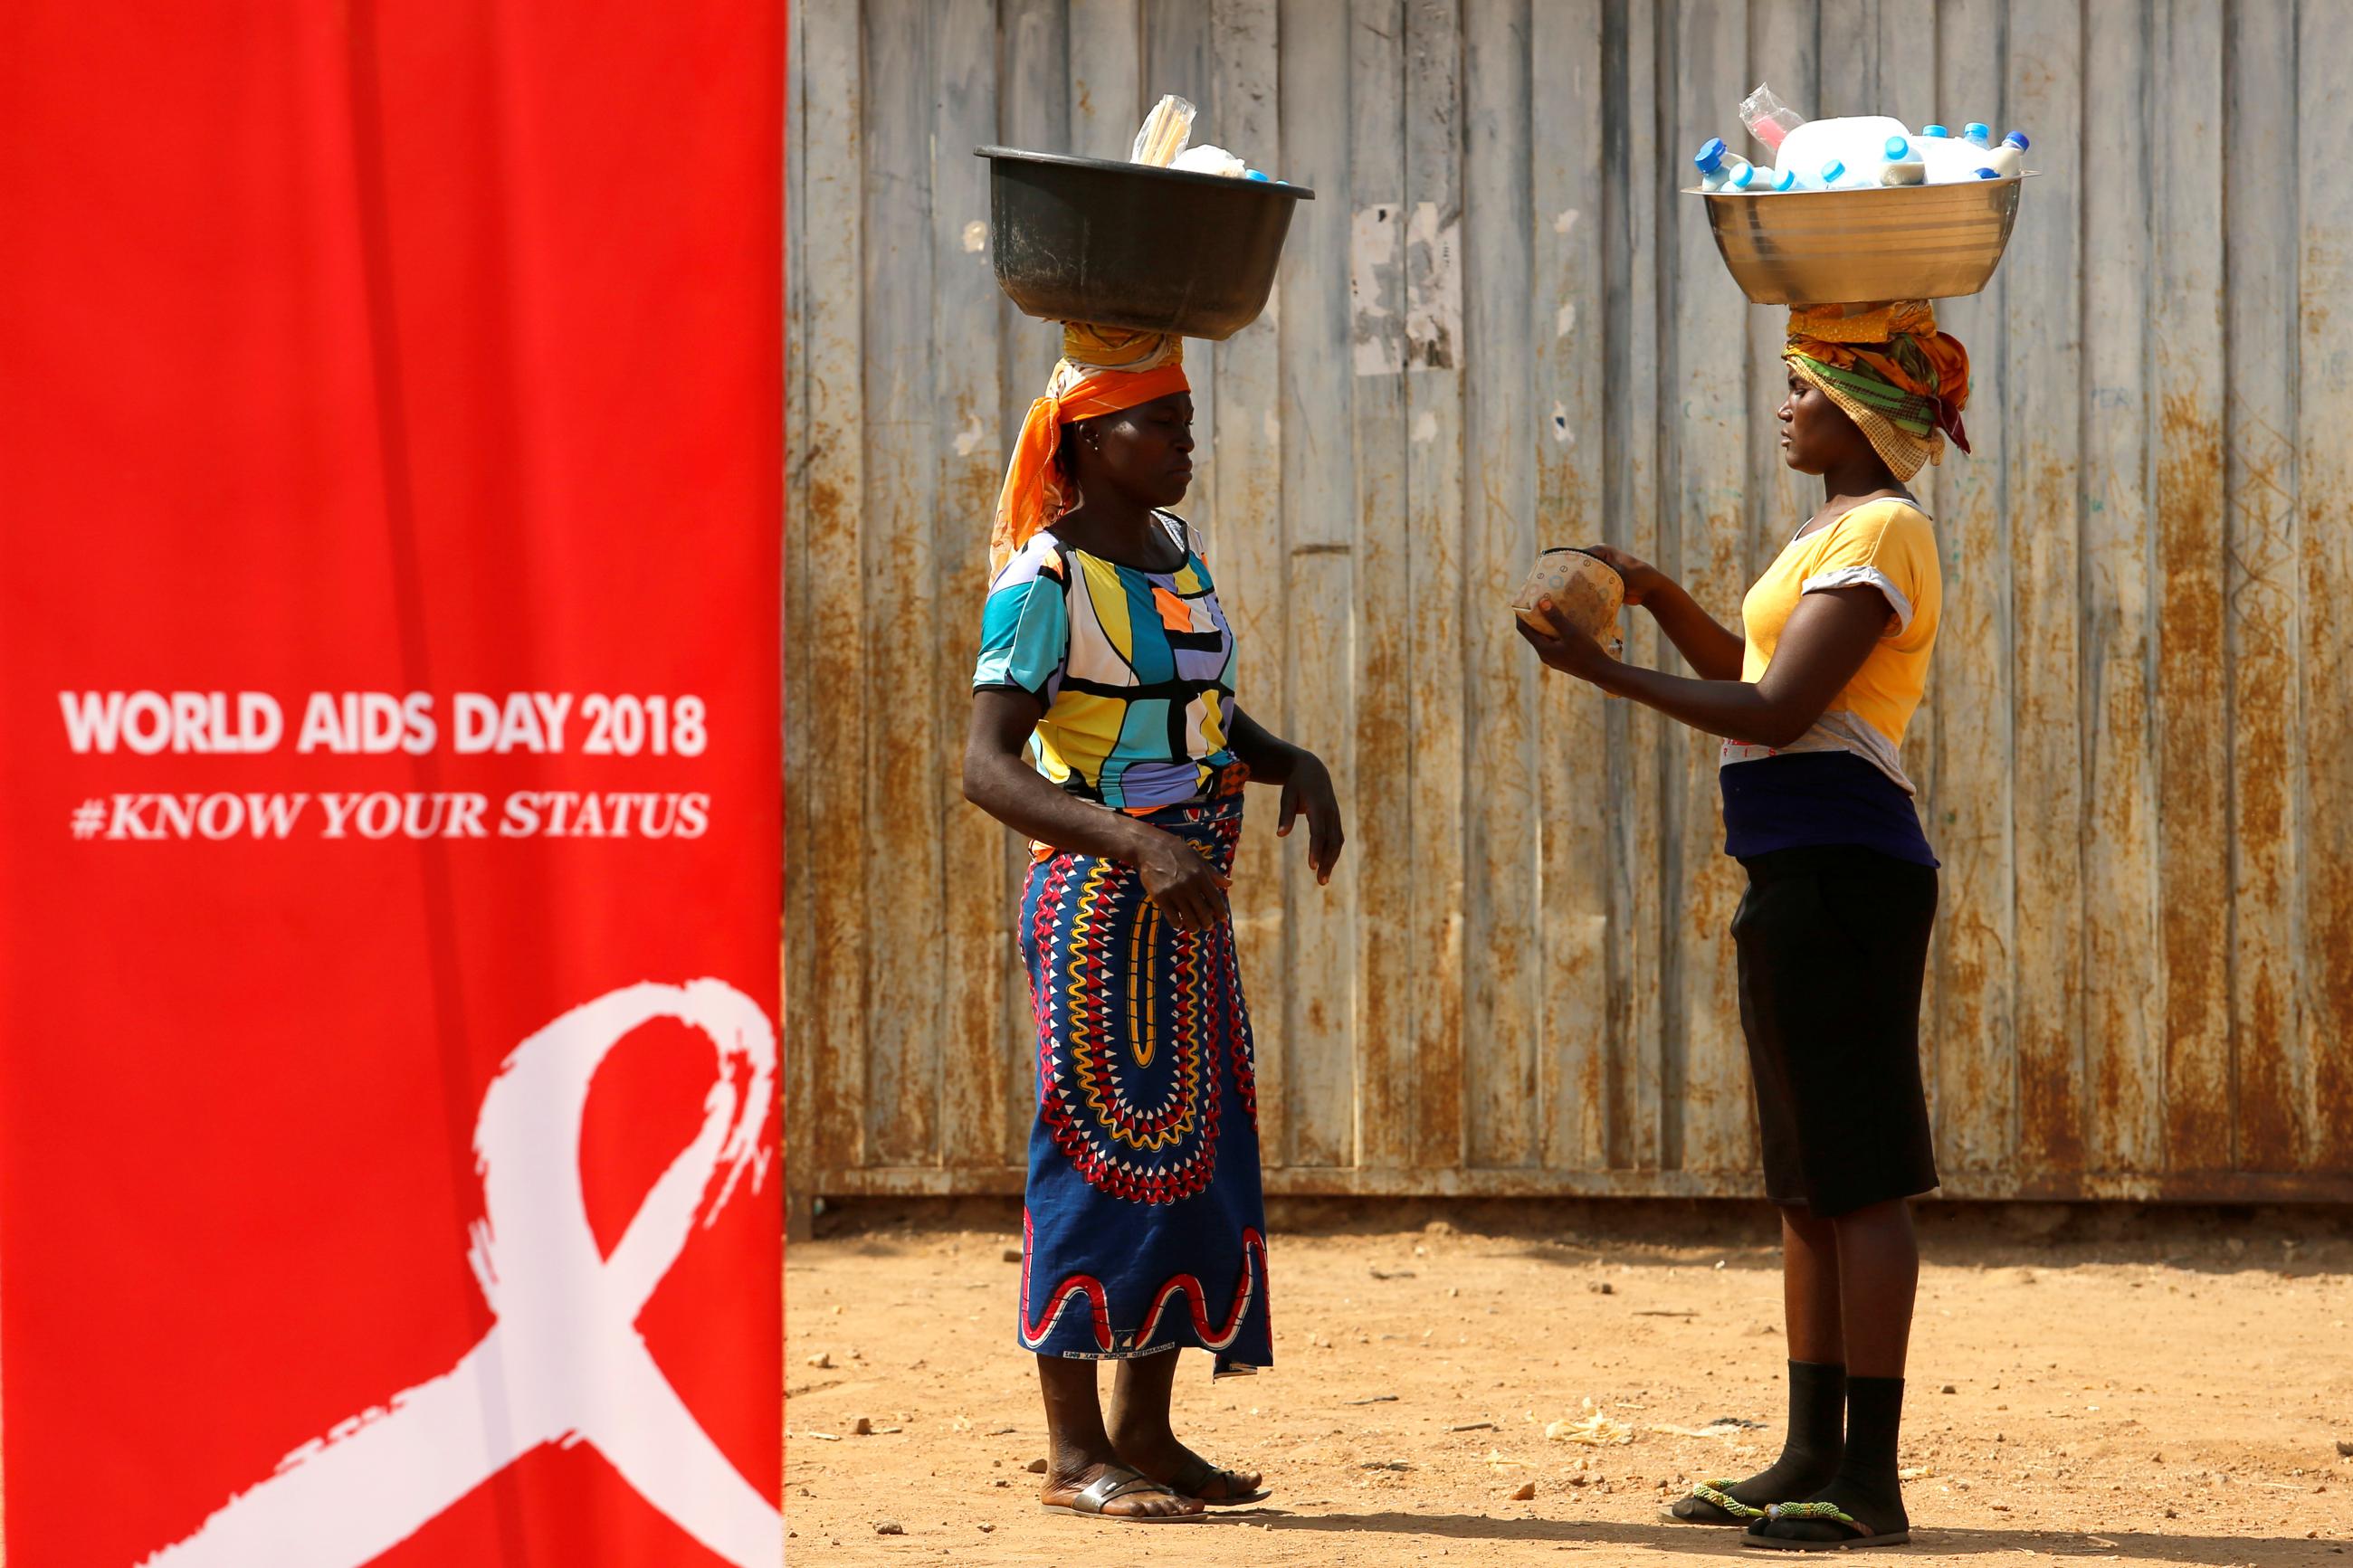 Two women stand near a bright red banner during an HIV/AIDS awareness campaign on World AIDS Day at the Kuchingoro IDP camp for internationally displaced persons, in Abuja, Nigeria, on December 1, 2018. 